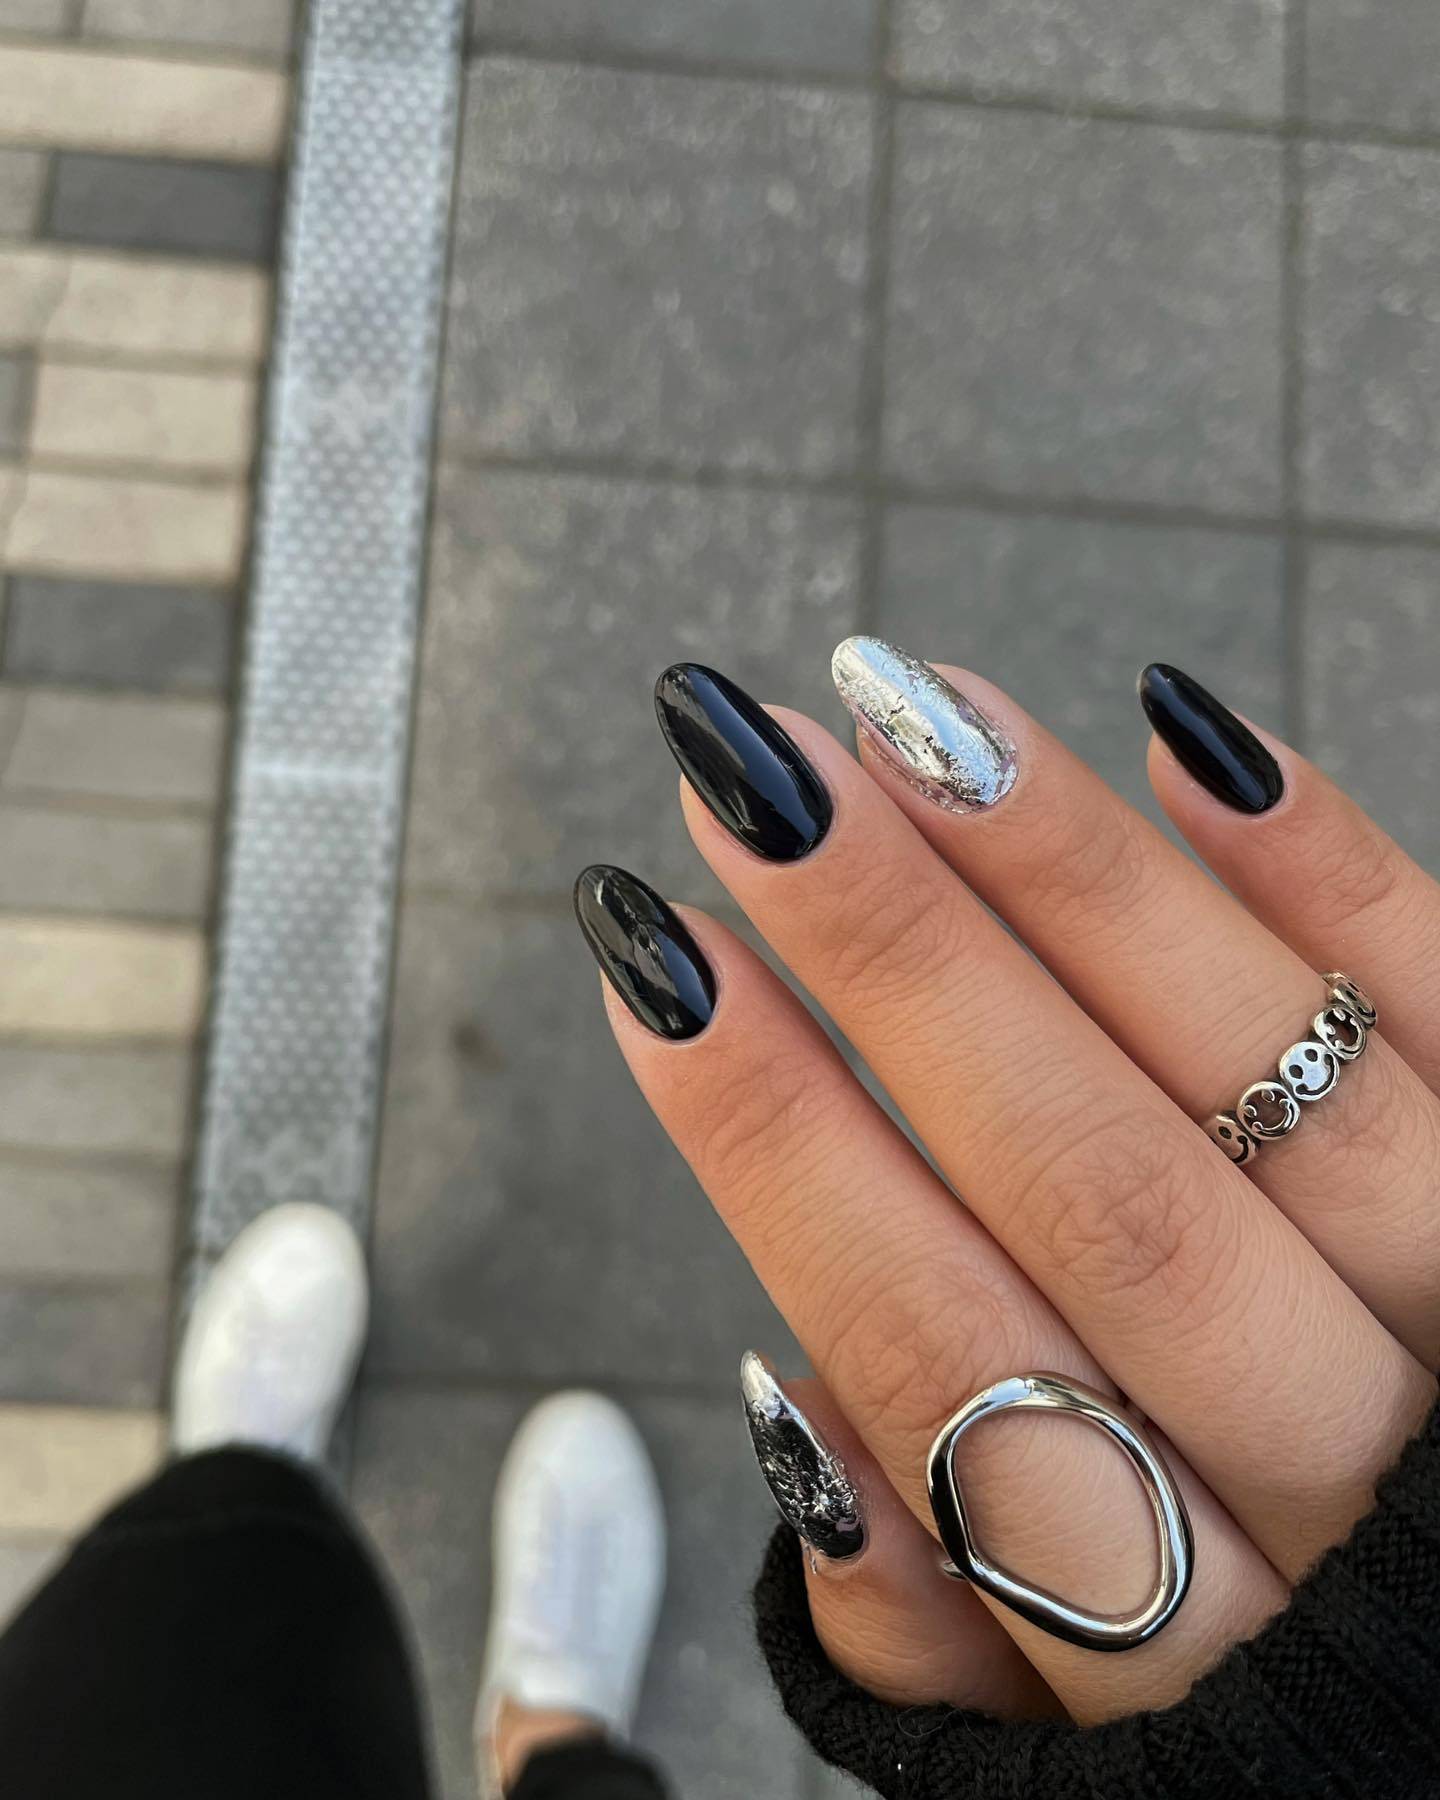 30 Chic Chrome Nail Designs For The Ultimate Glam Look - 245